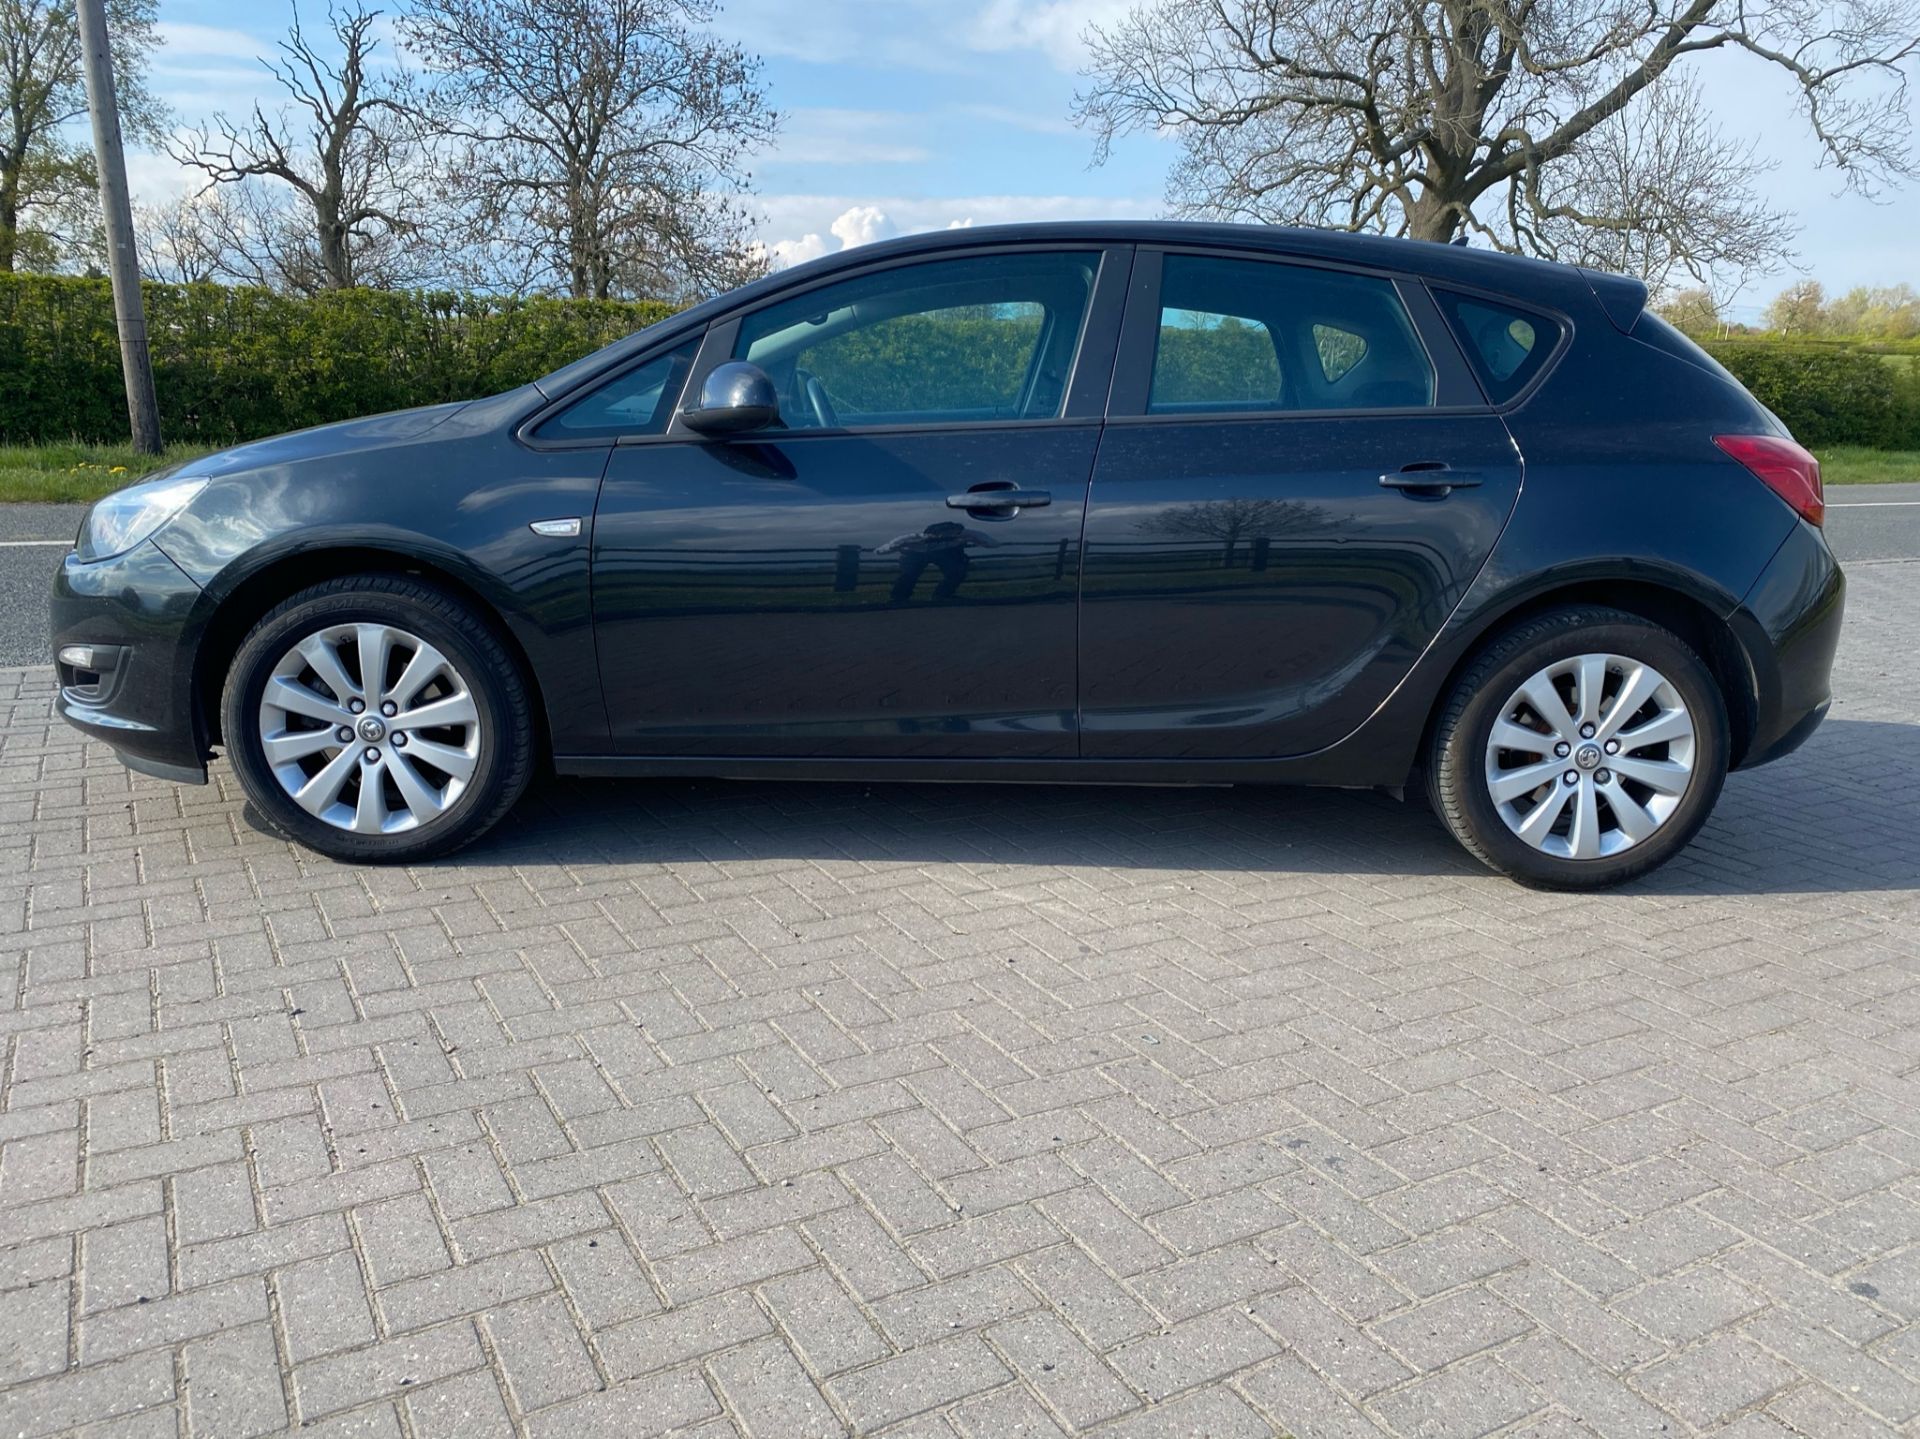 ON SALE VAUXHALL ASTRA 1.6 CDTI "ECO' "DESIGN" 5 DOOR HATCHBACK - AIR CON - NEW SHAPE - 2015 MODEL - - Image 4 of 14